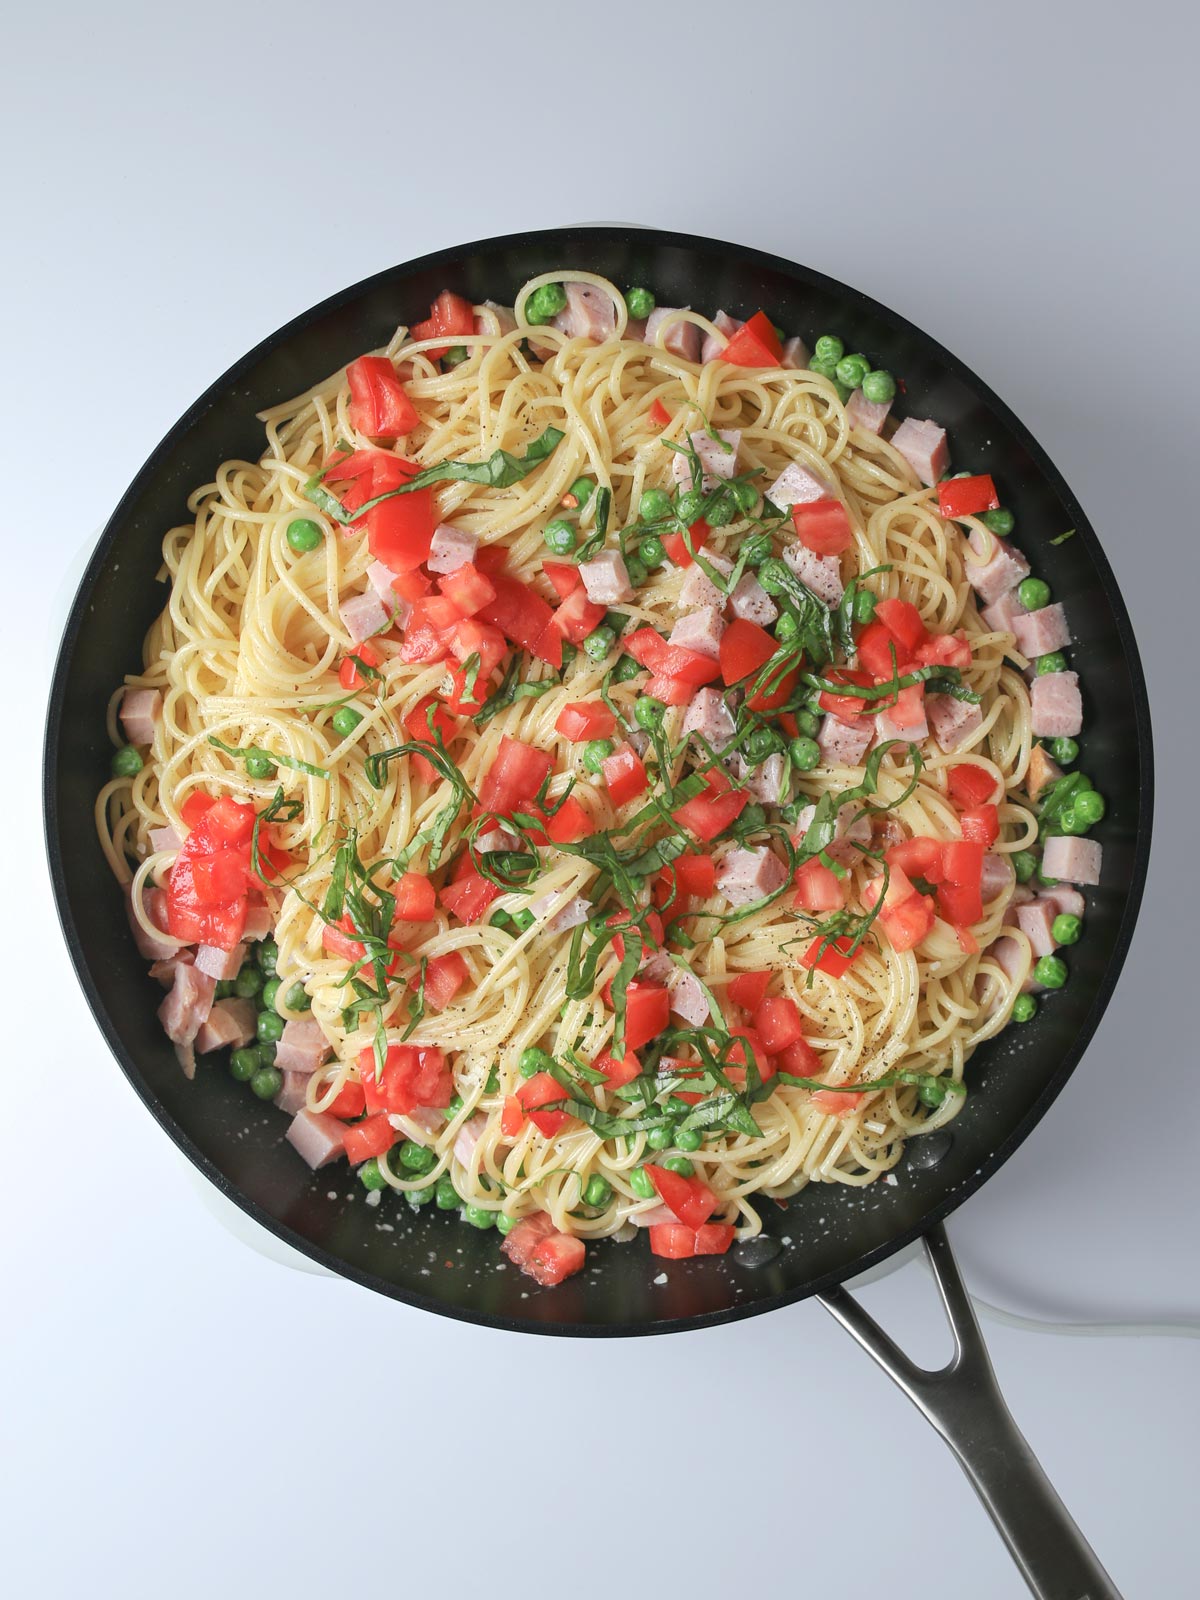 the finished pasta in the skillet with tomatoes and fresh basil.